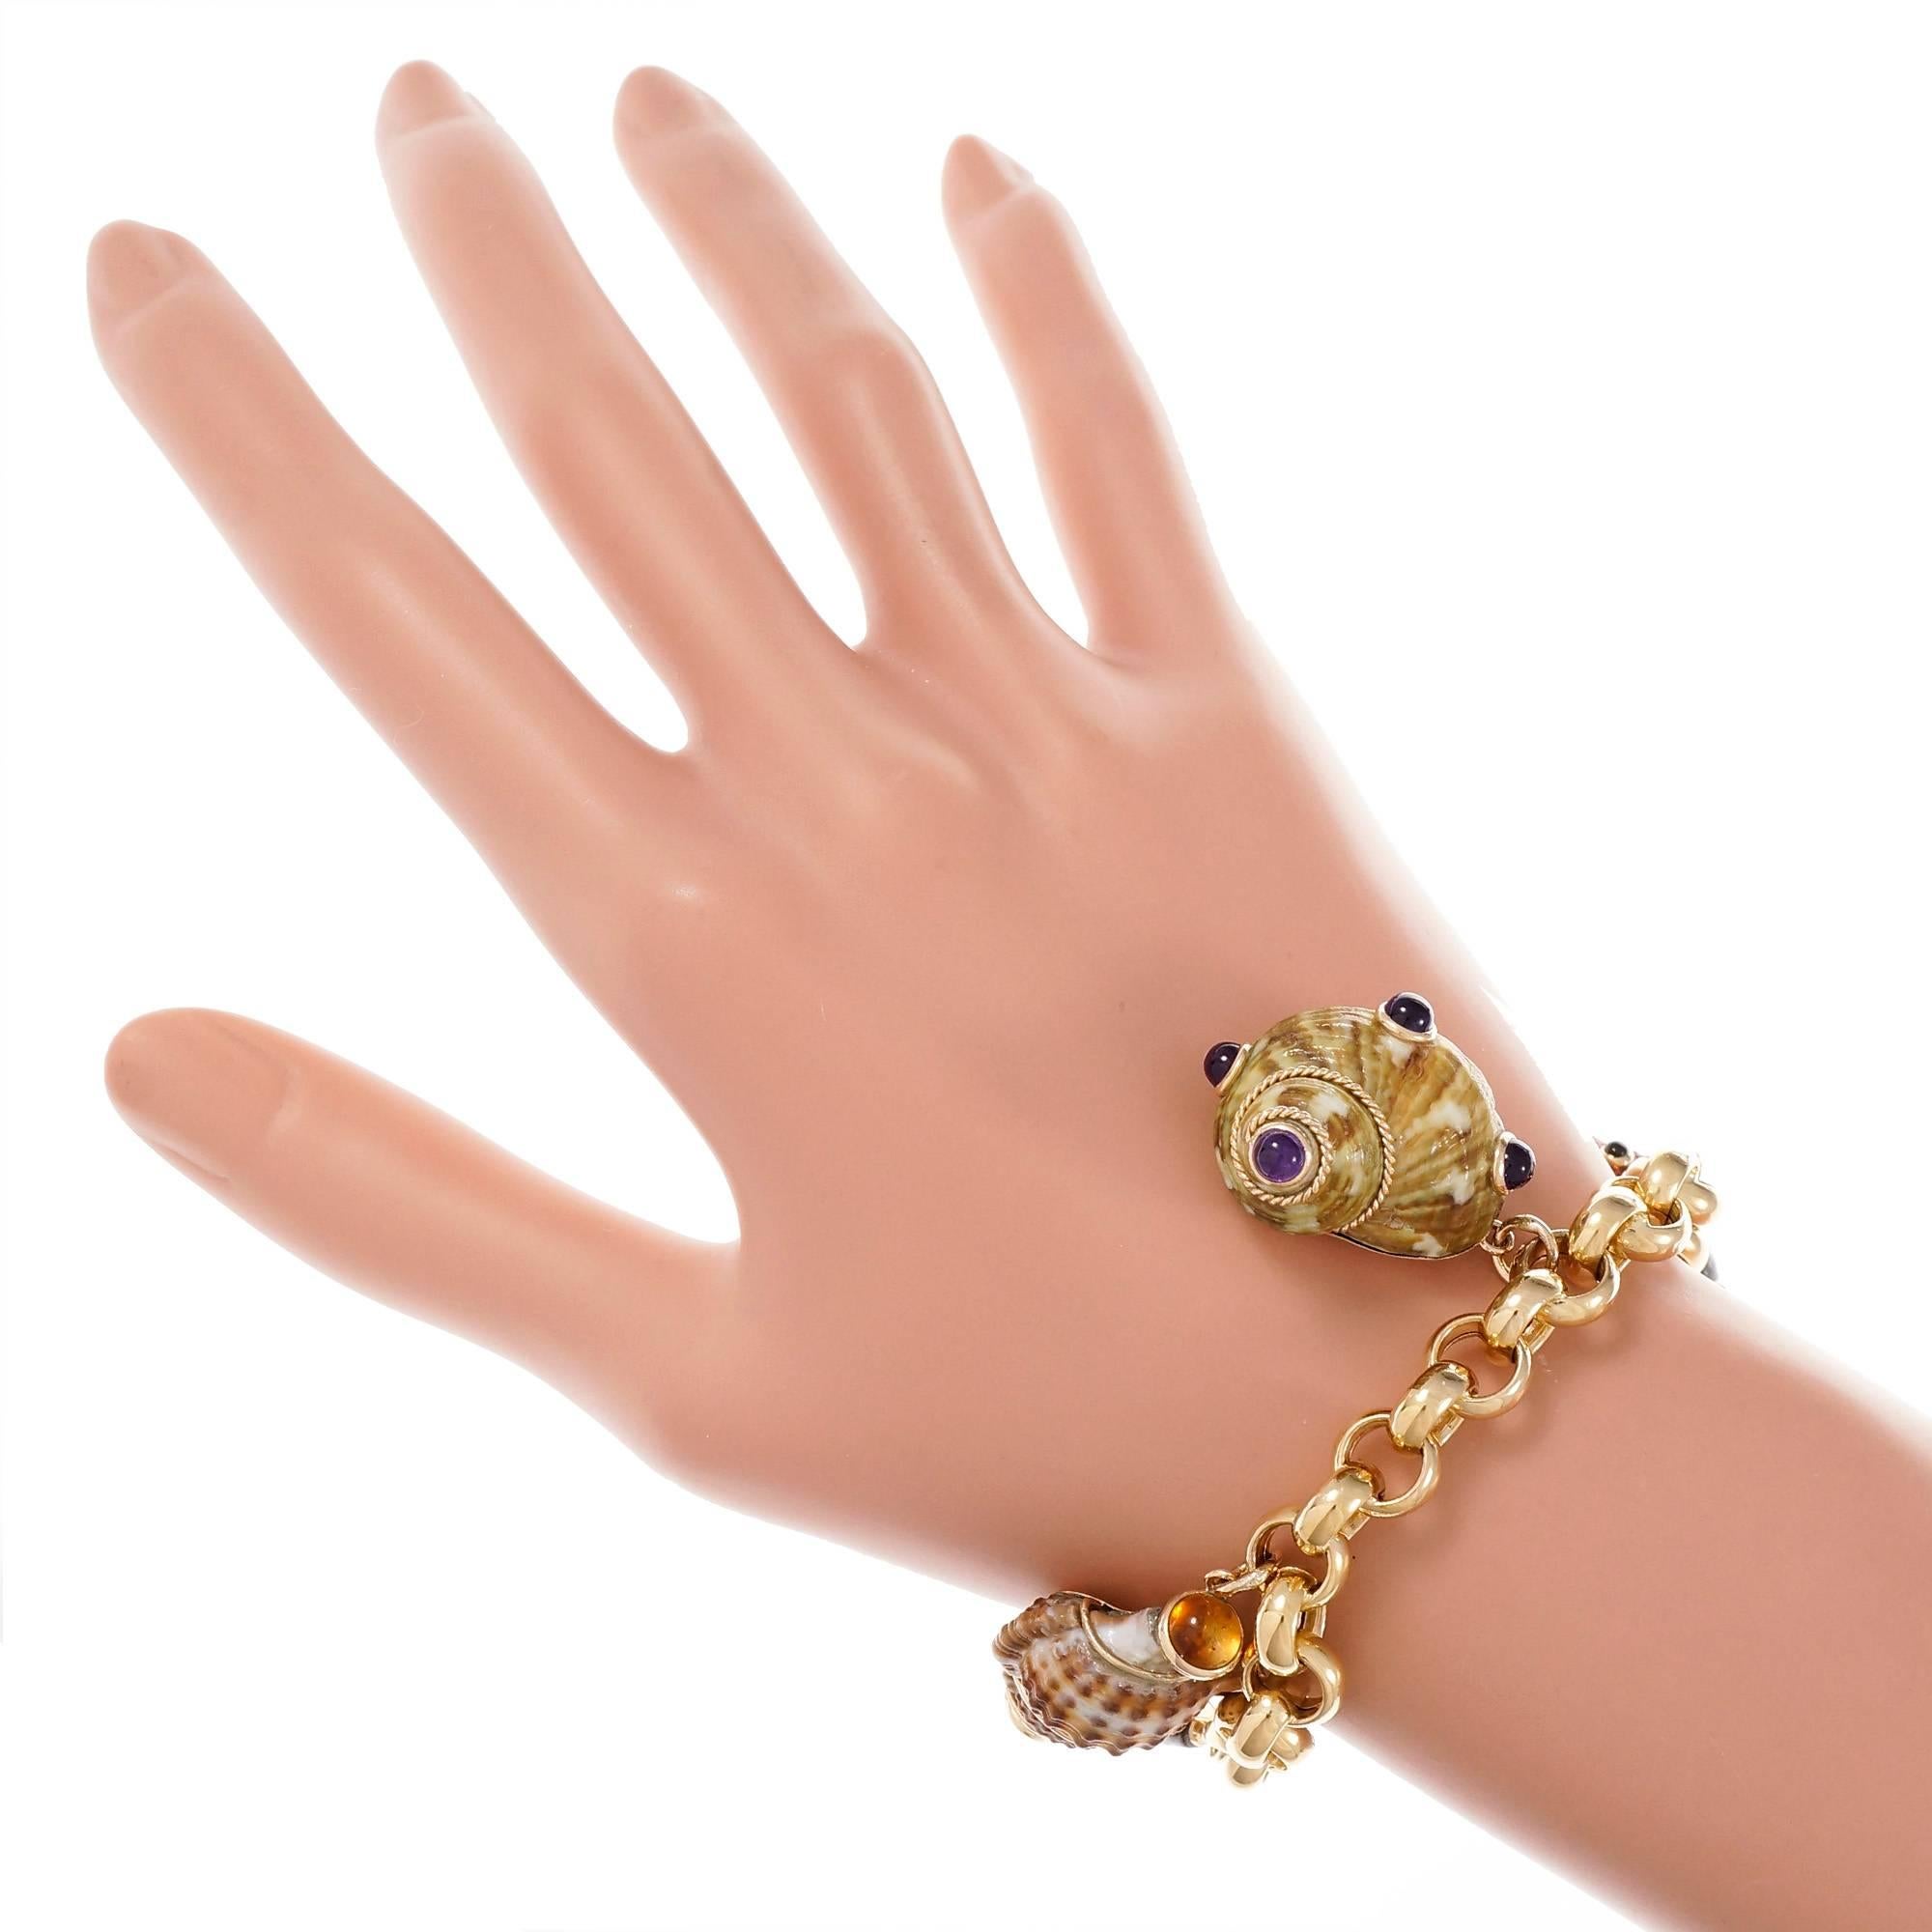 Sea shell designer MAZ multi-color shells accented with gold beads in 14k and natural gemstones. The charms are attached to an Italian made 18k yellow gold bracelet.

14k & 18k yellow gold
4 round cabochon purple Amethyst, 3.88mm
5 natural multi